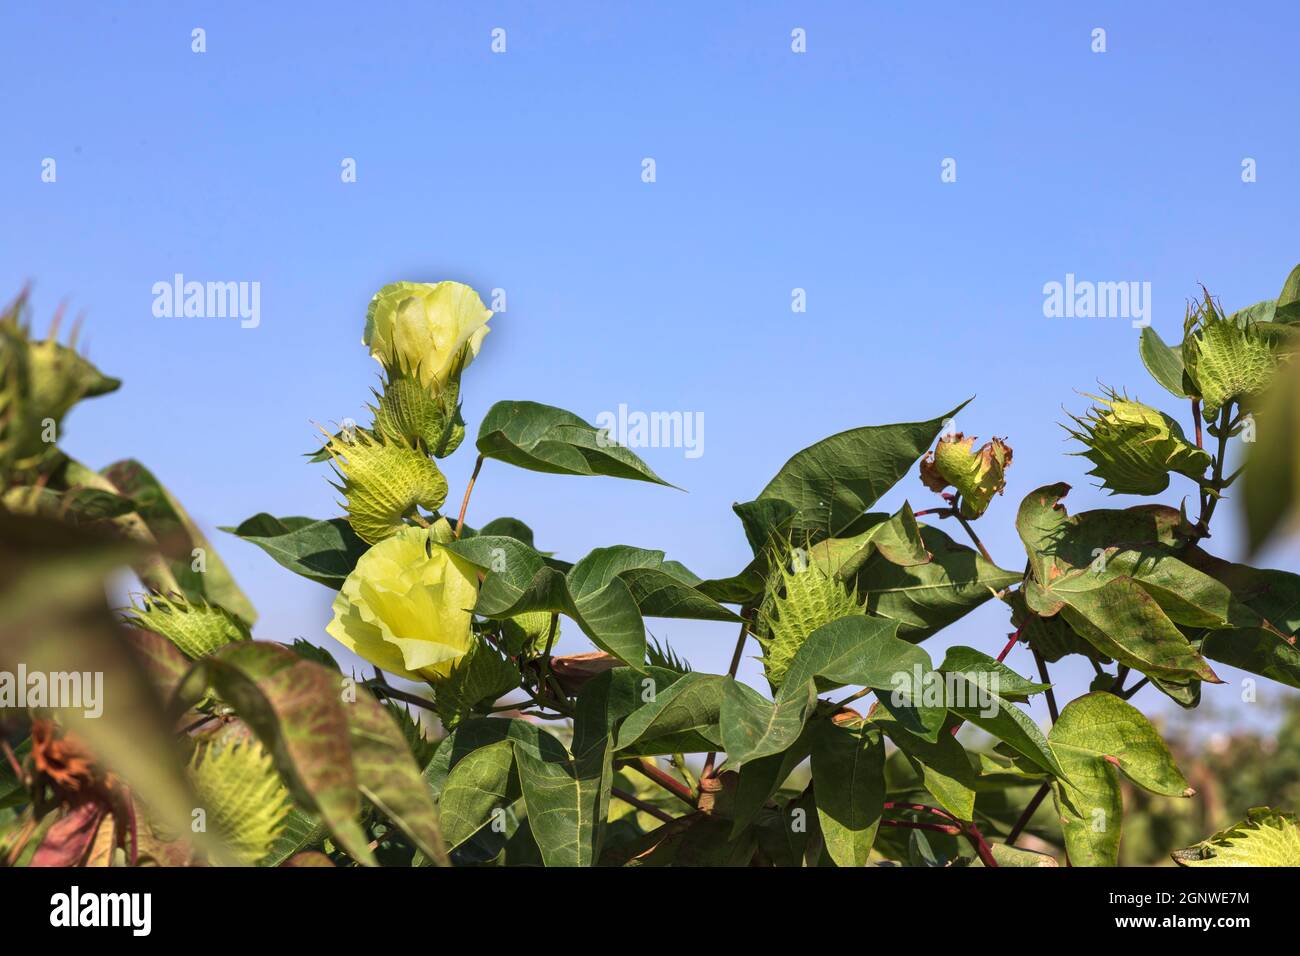 Flowers and buds of a cotton plant close-up on a background of blue sky. Stock Photo